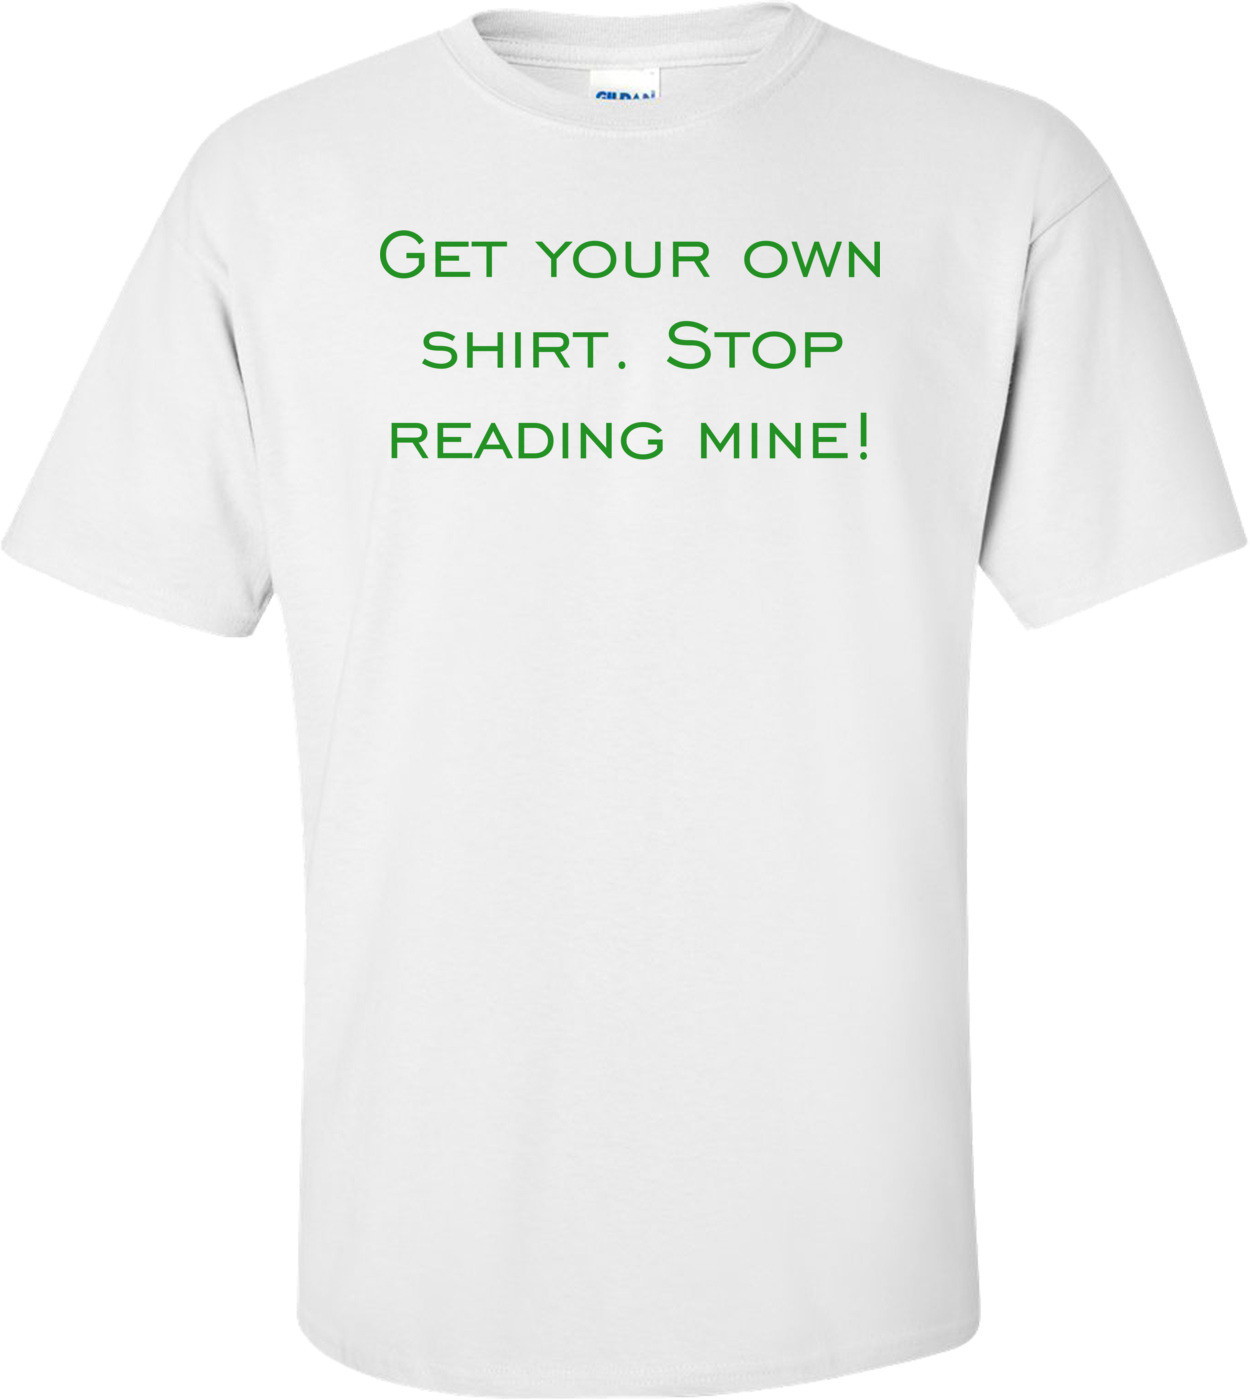 Get your own shirt. Stop reading mine! Shirt